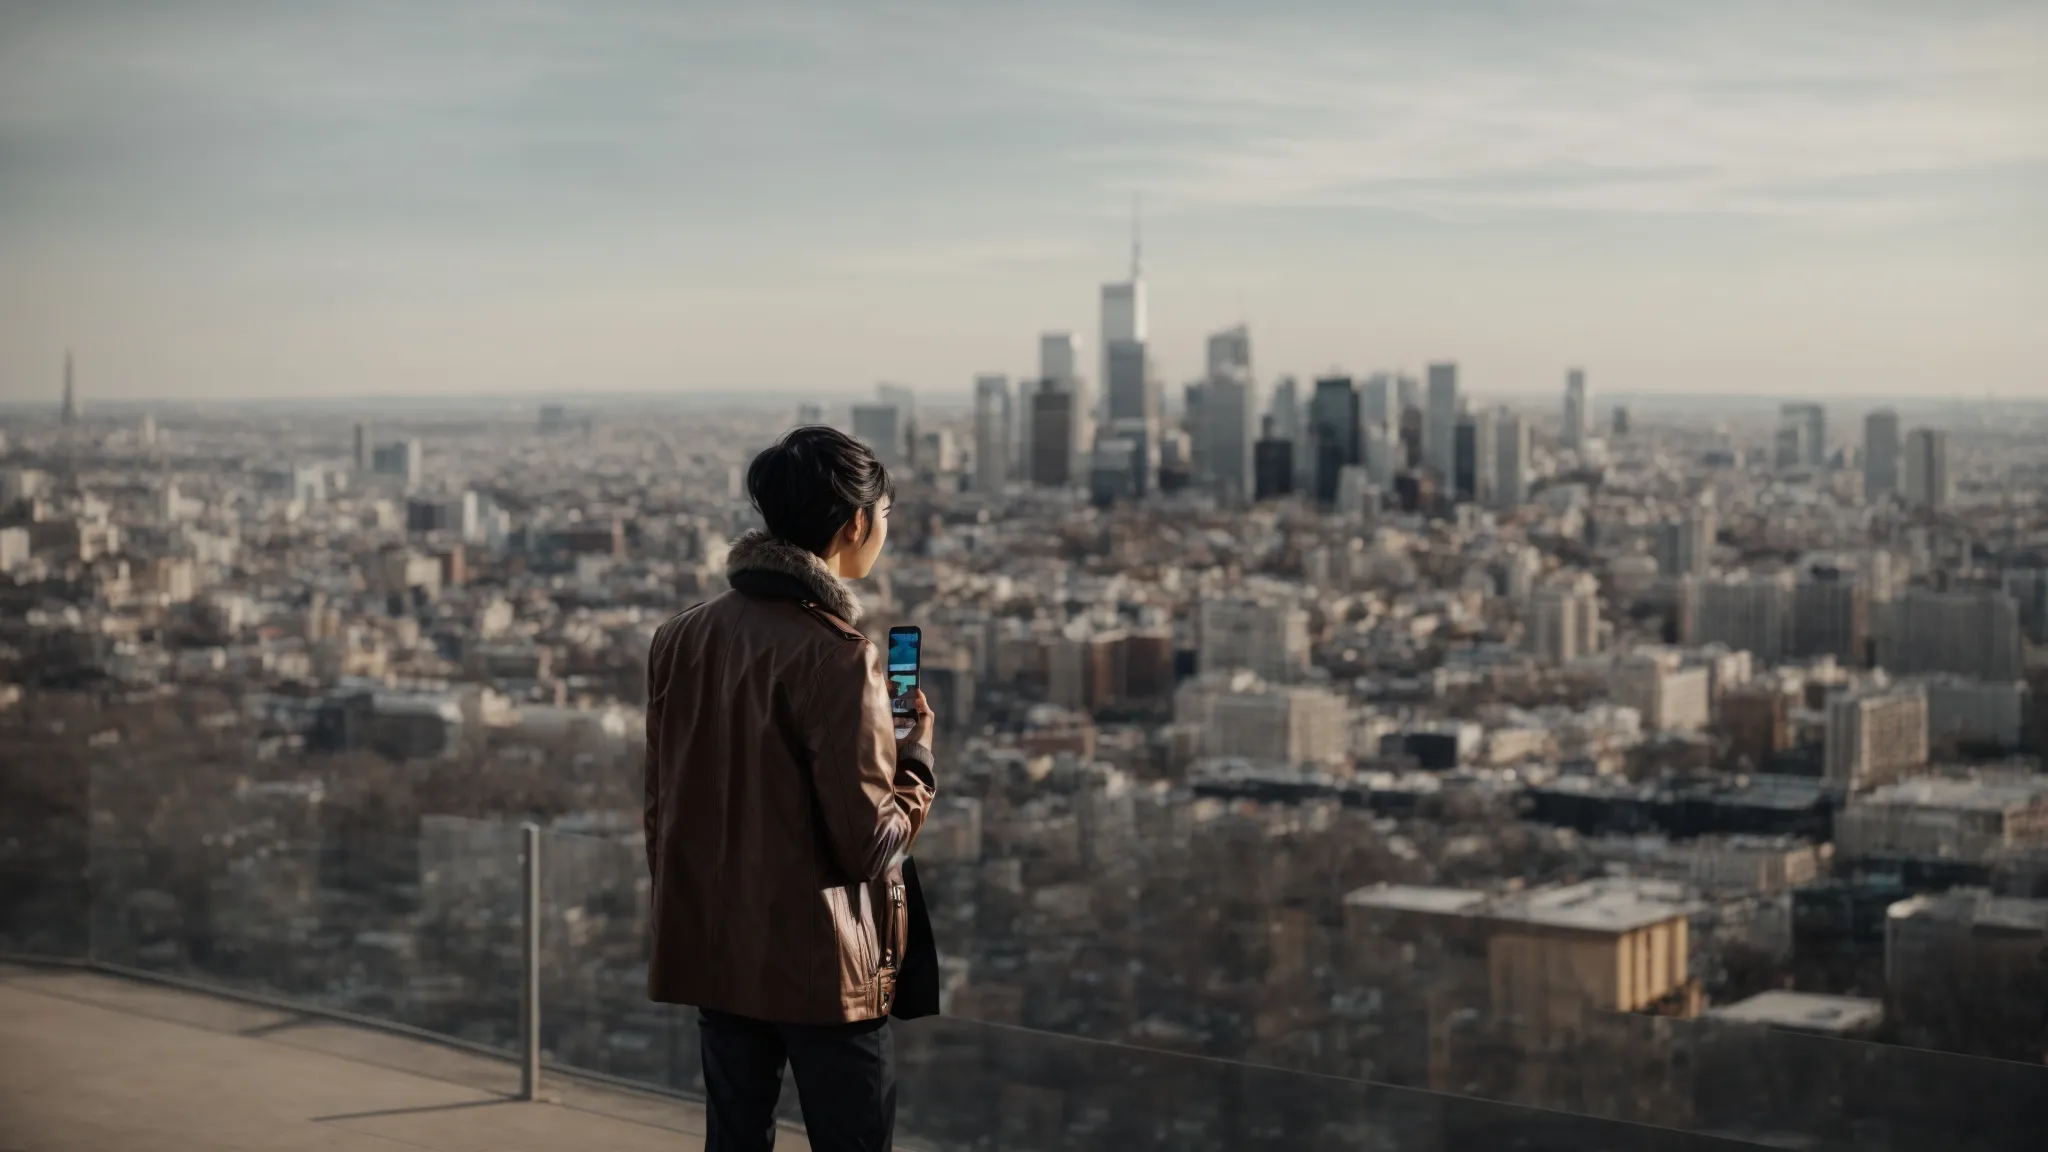 a person speaking into a smartphone with a cityscape in the background.